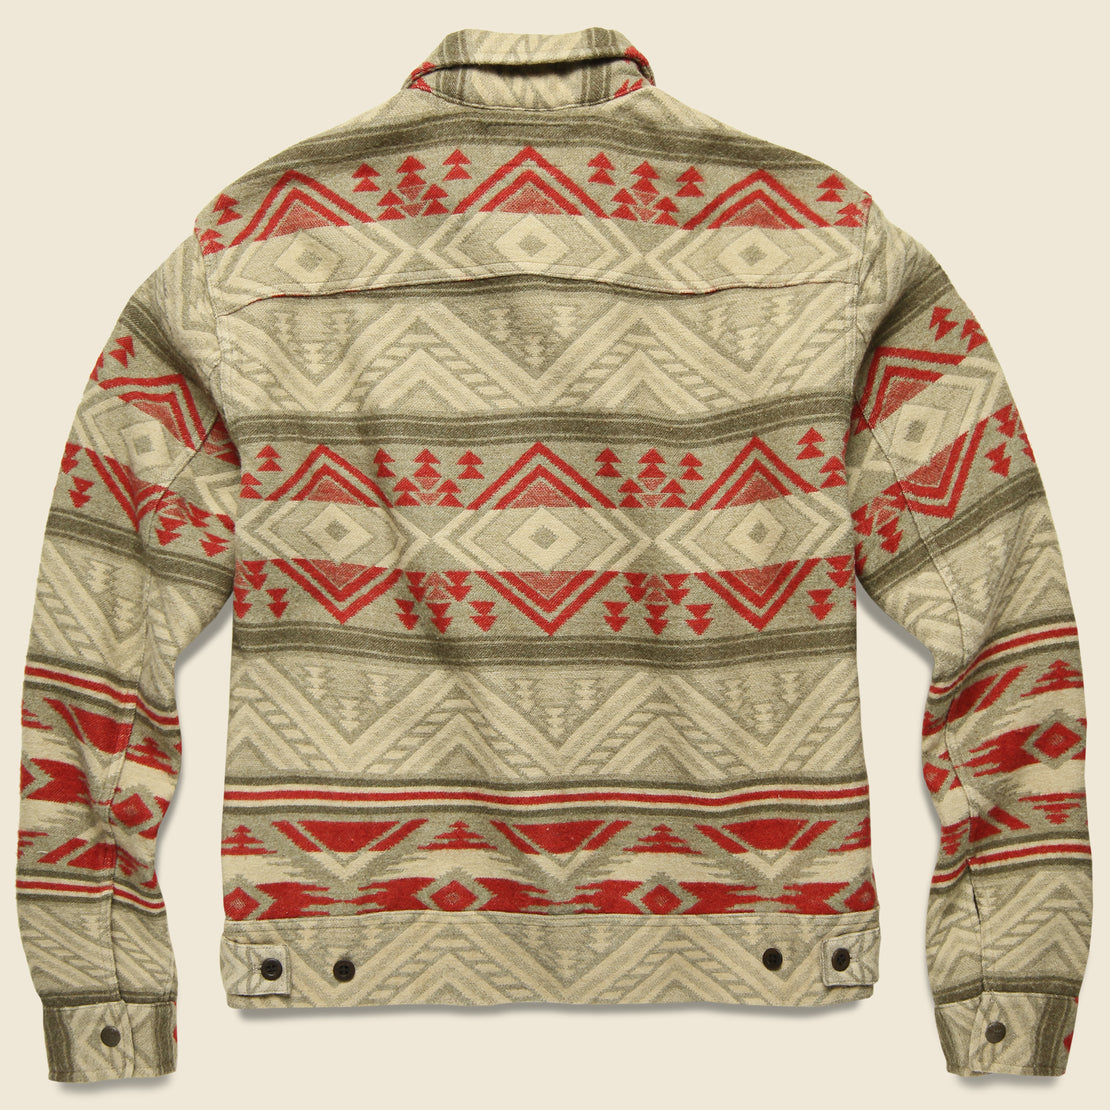 Marvel Beacon Jacquard Overshirt - Tan/Red - RRL - STAG Provisions - Tops - L/S Woven - Overshirt